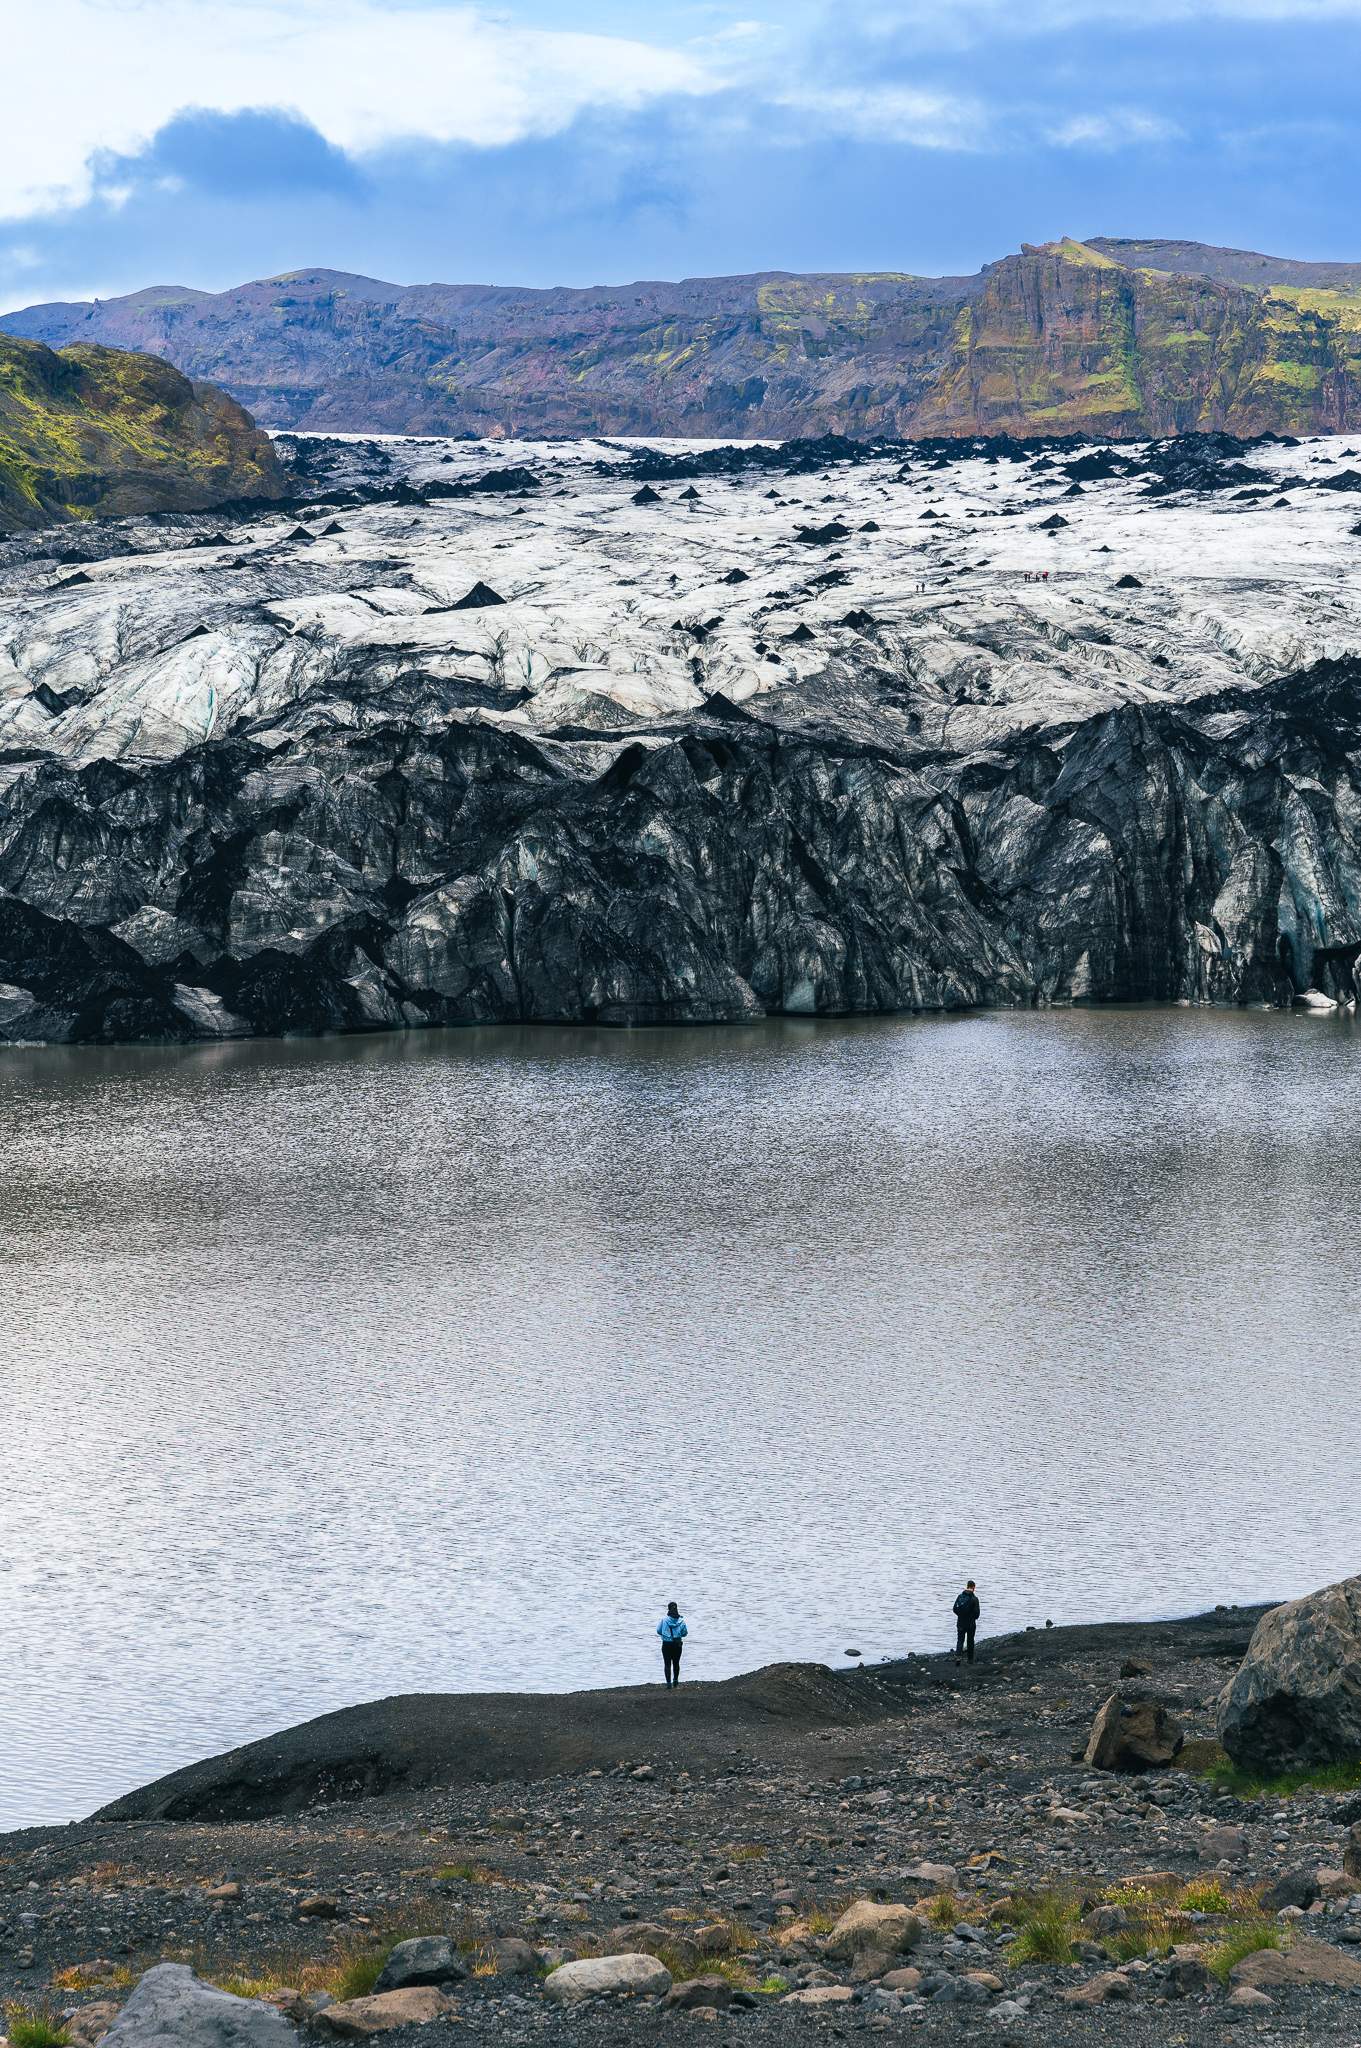 Head of Sólheimajökull glacier - the black stains are caused by ashes accumulated from past volcano eruptions, Icleand